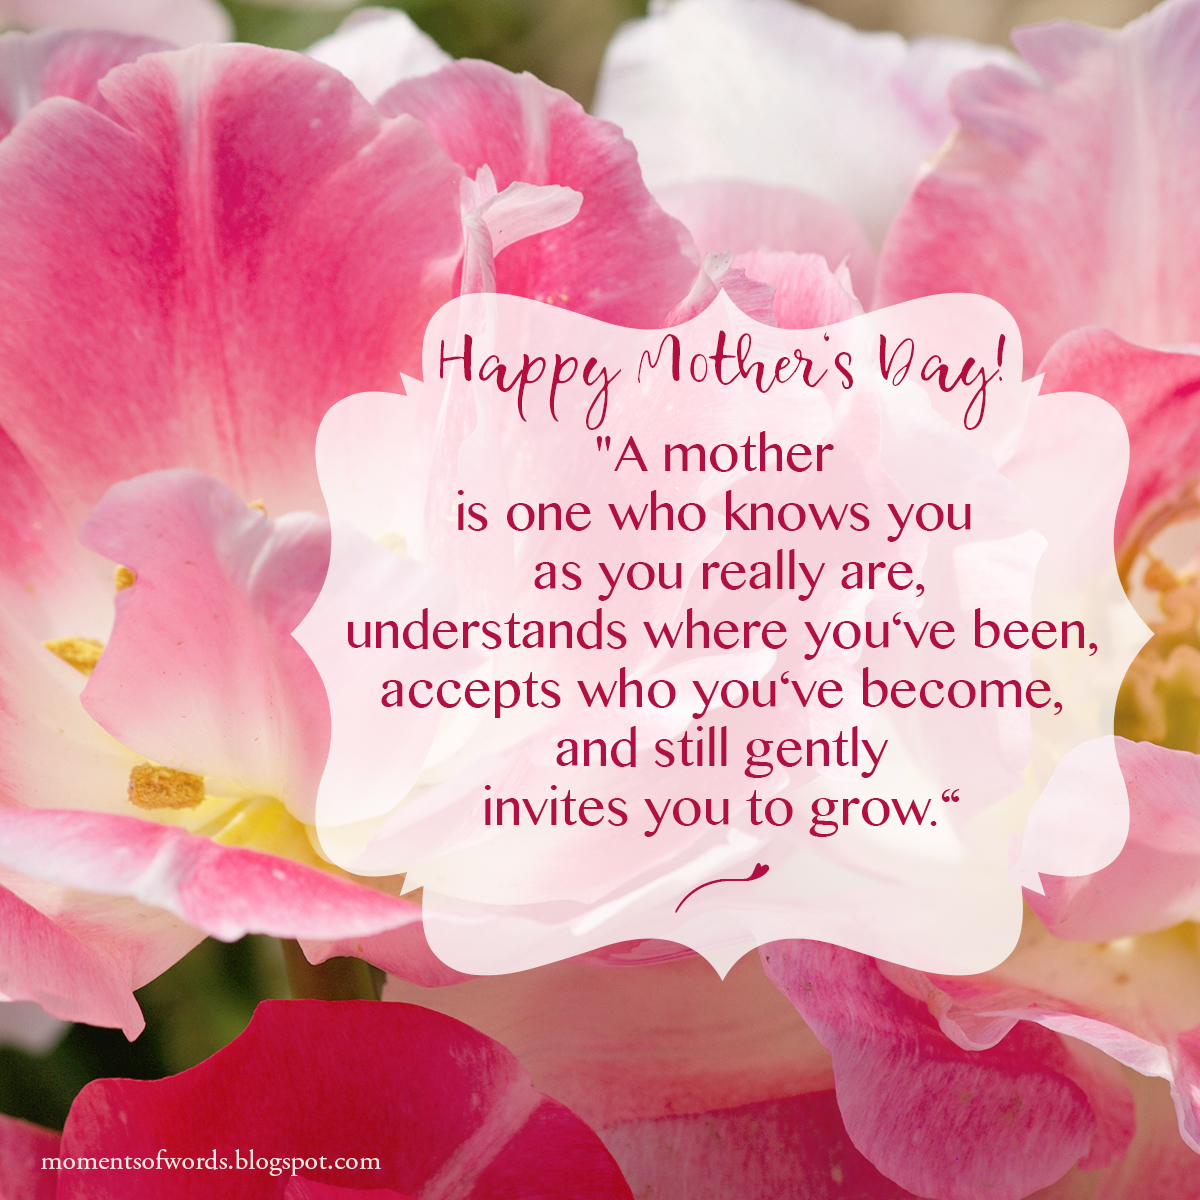 Happy Mother's Day! ♥ | Moments of words